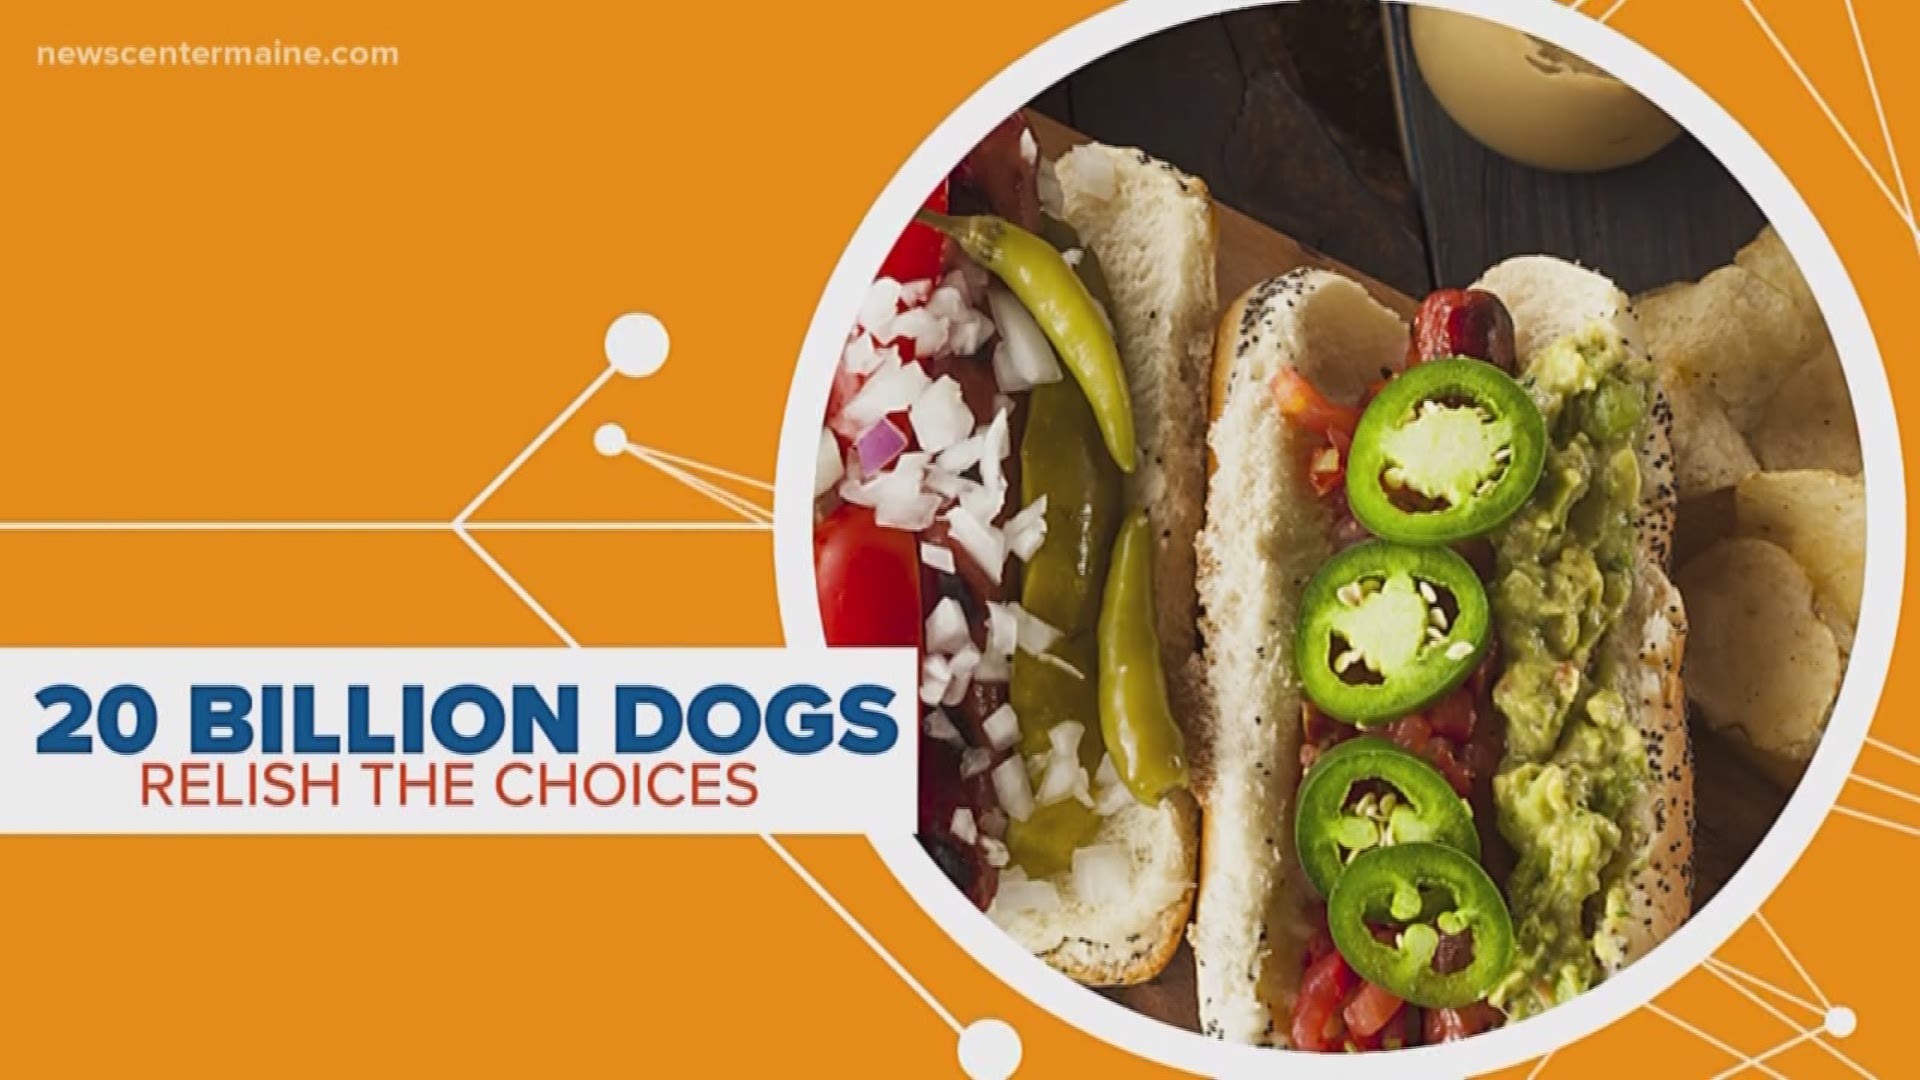 The National Hot Dog Council says Americans consume about 20 billion hot dogs a year.